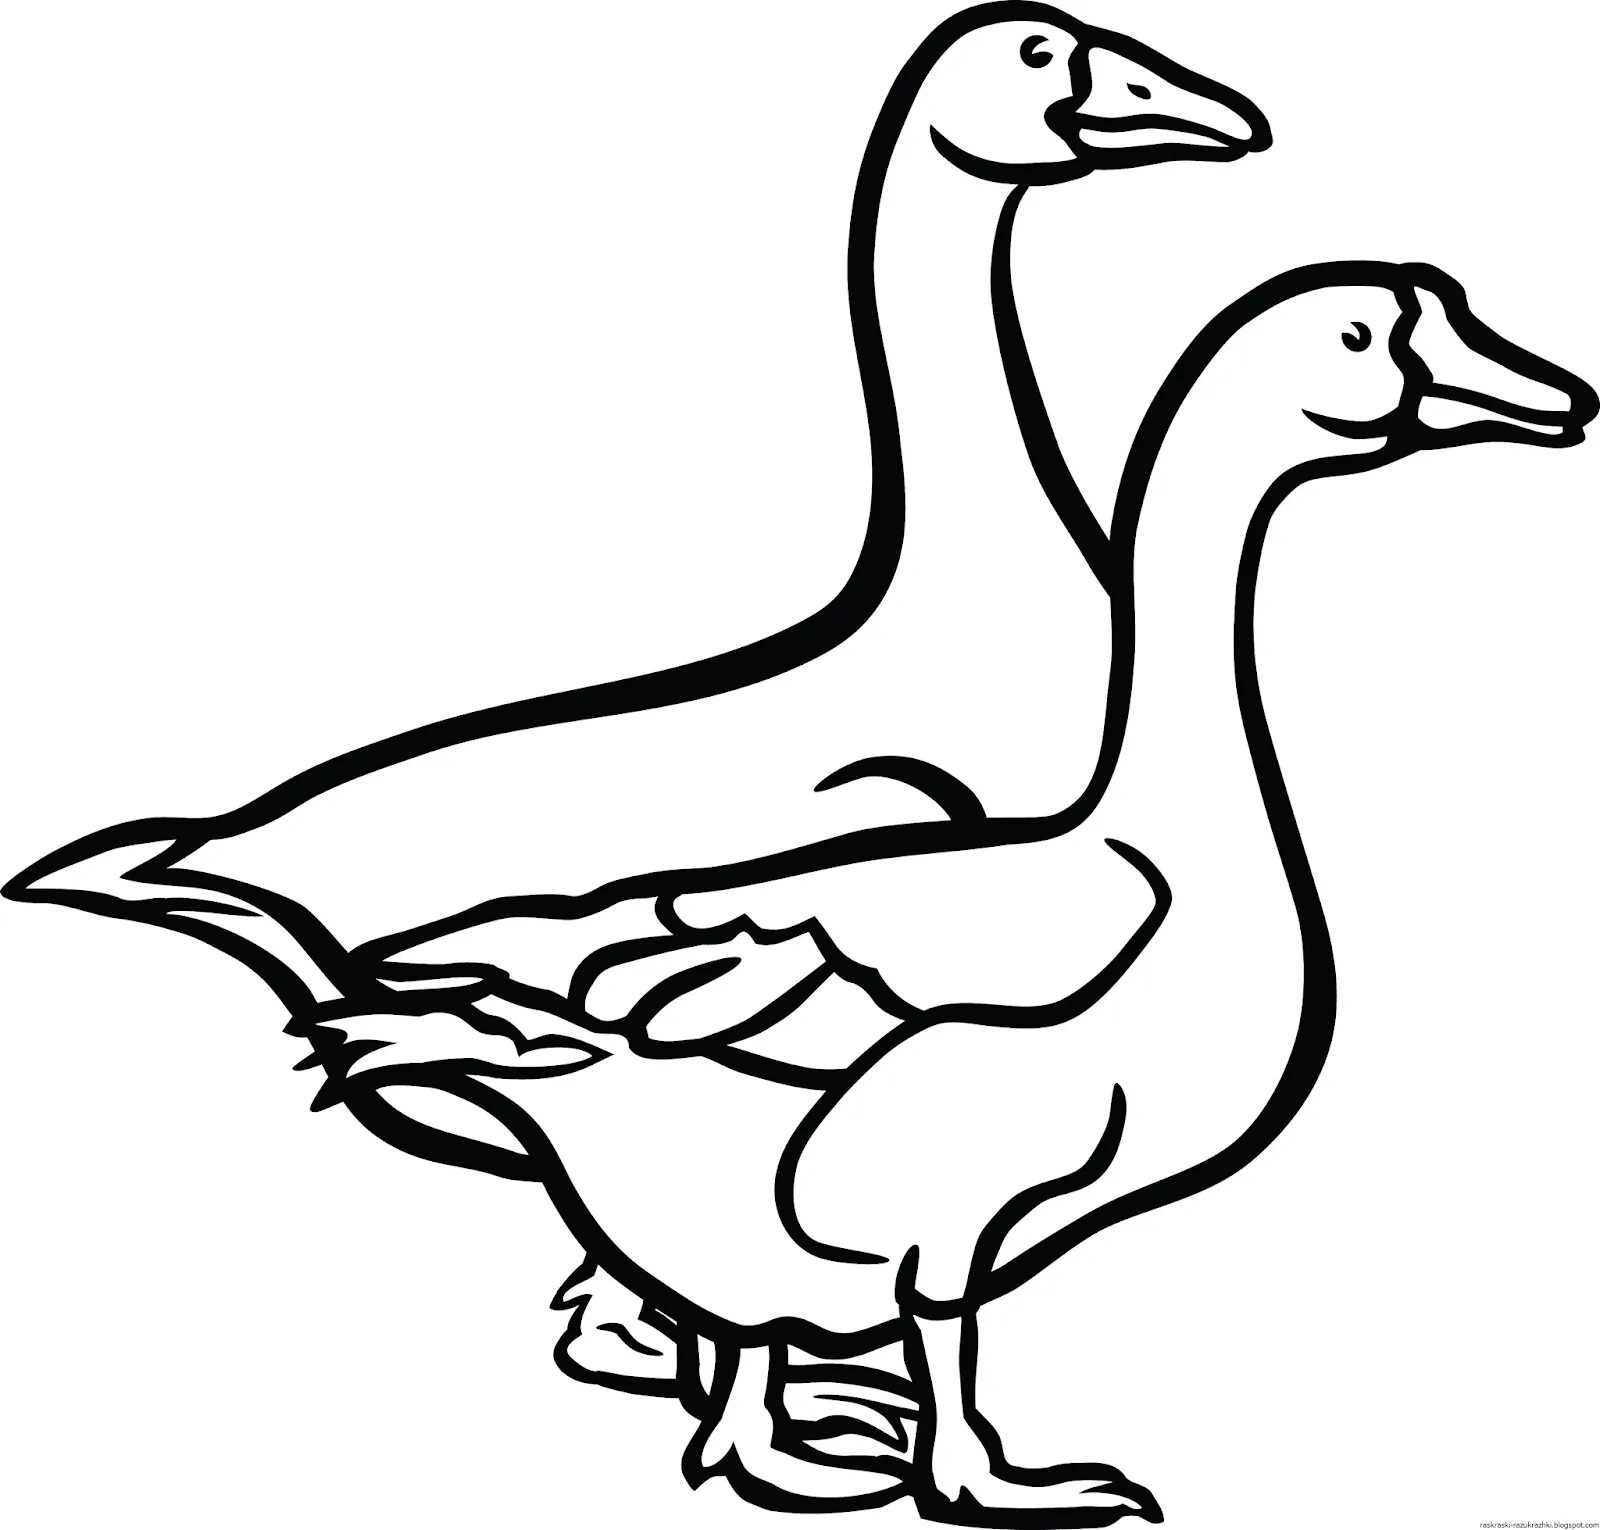 Awesome geese coloring pages for girls